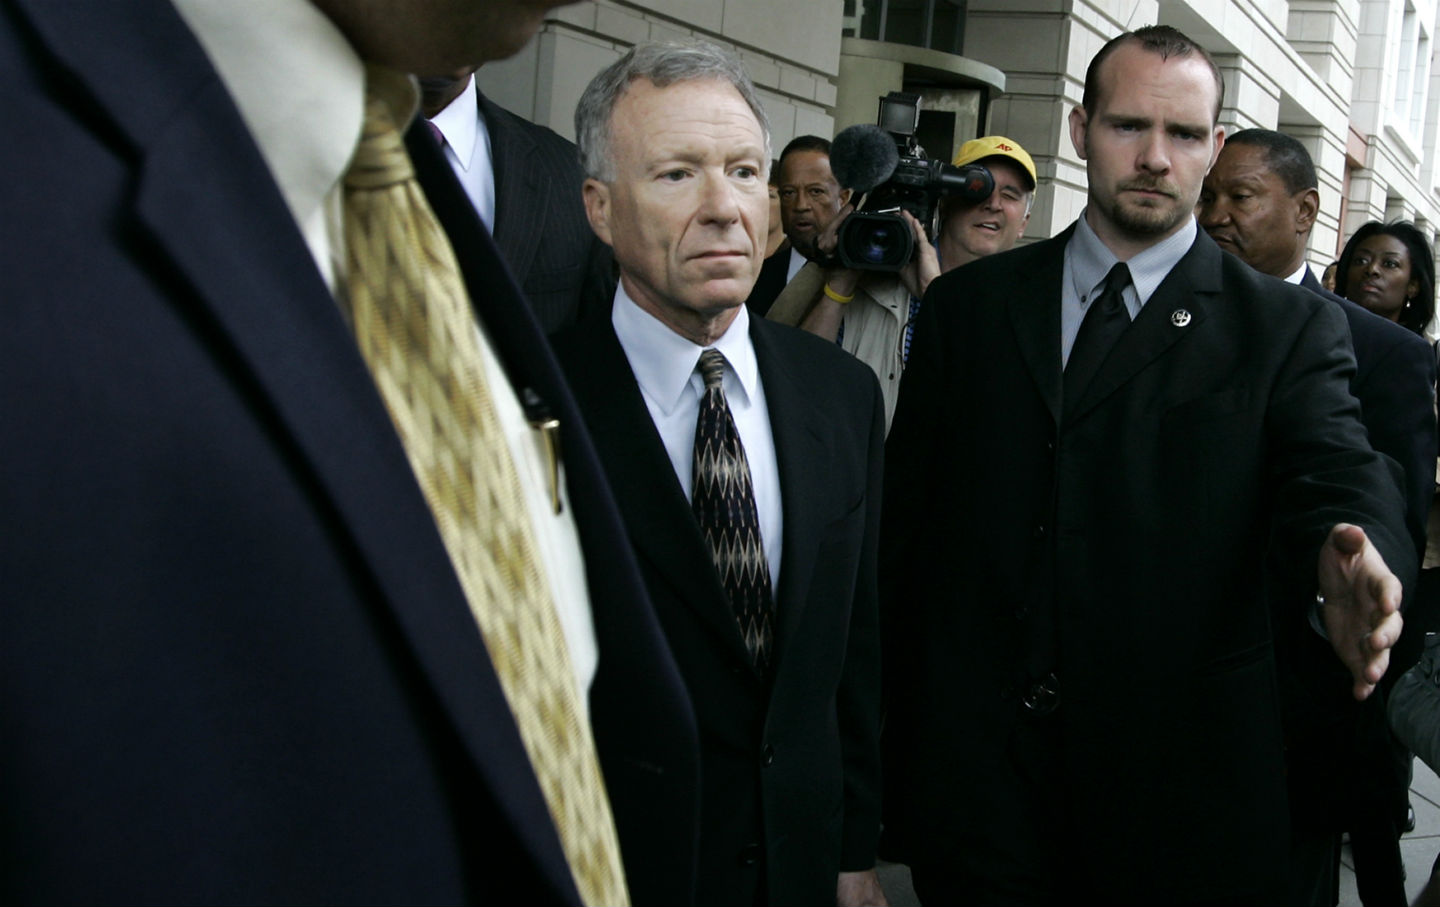 October 28, 2005: White House Official ‘Scooter’ Libby Is Indicted in the Valerie Plame Affair